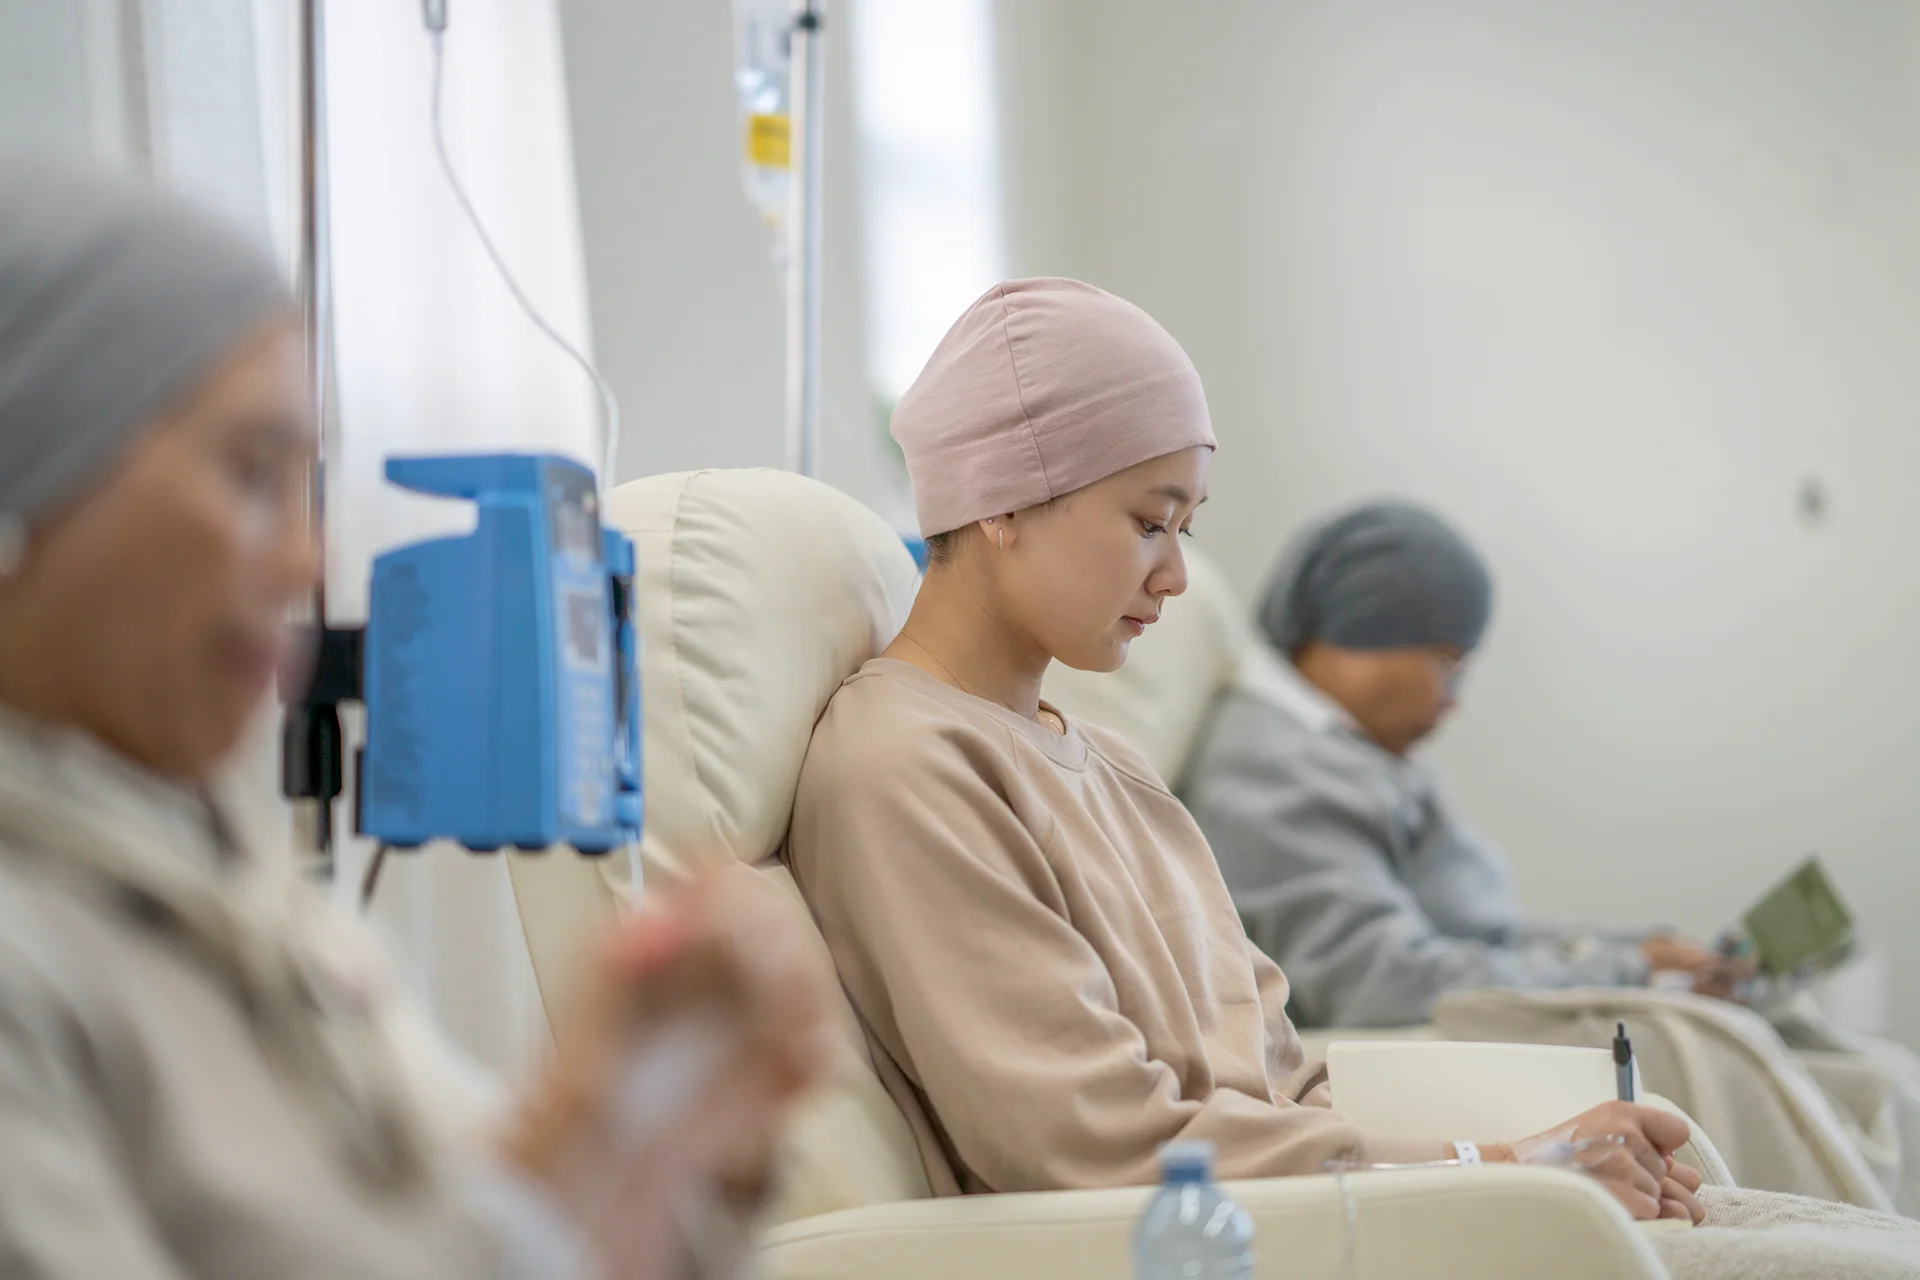 cancer patients underwent chemotherapy session